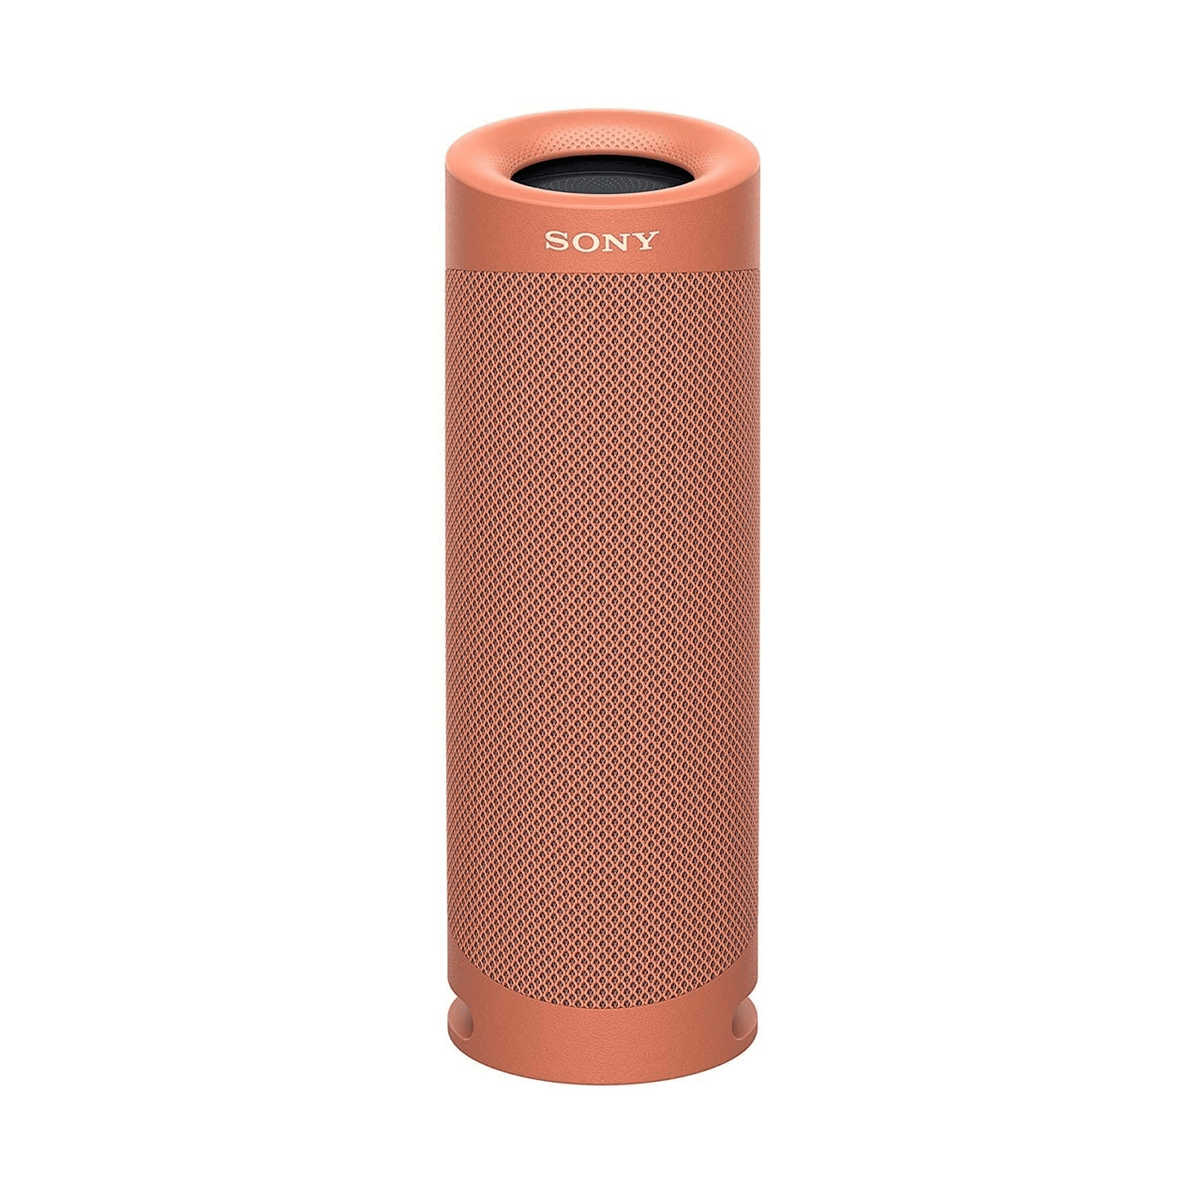 Sony SRS-XB23 Extra Bass Portable Wireless Bluetooth Speaker Coral Red